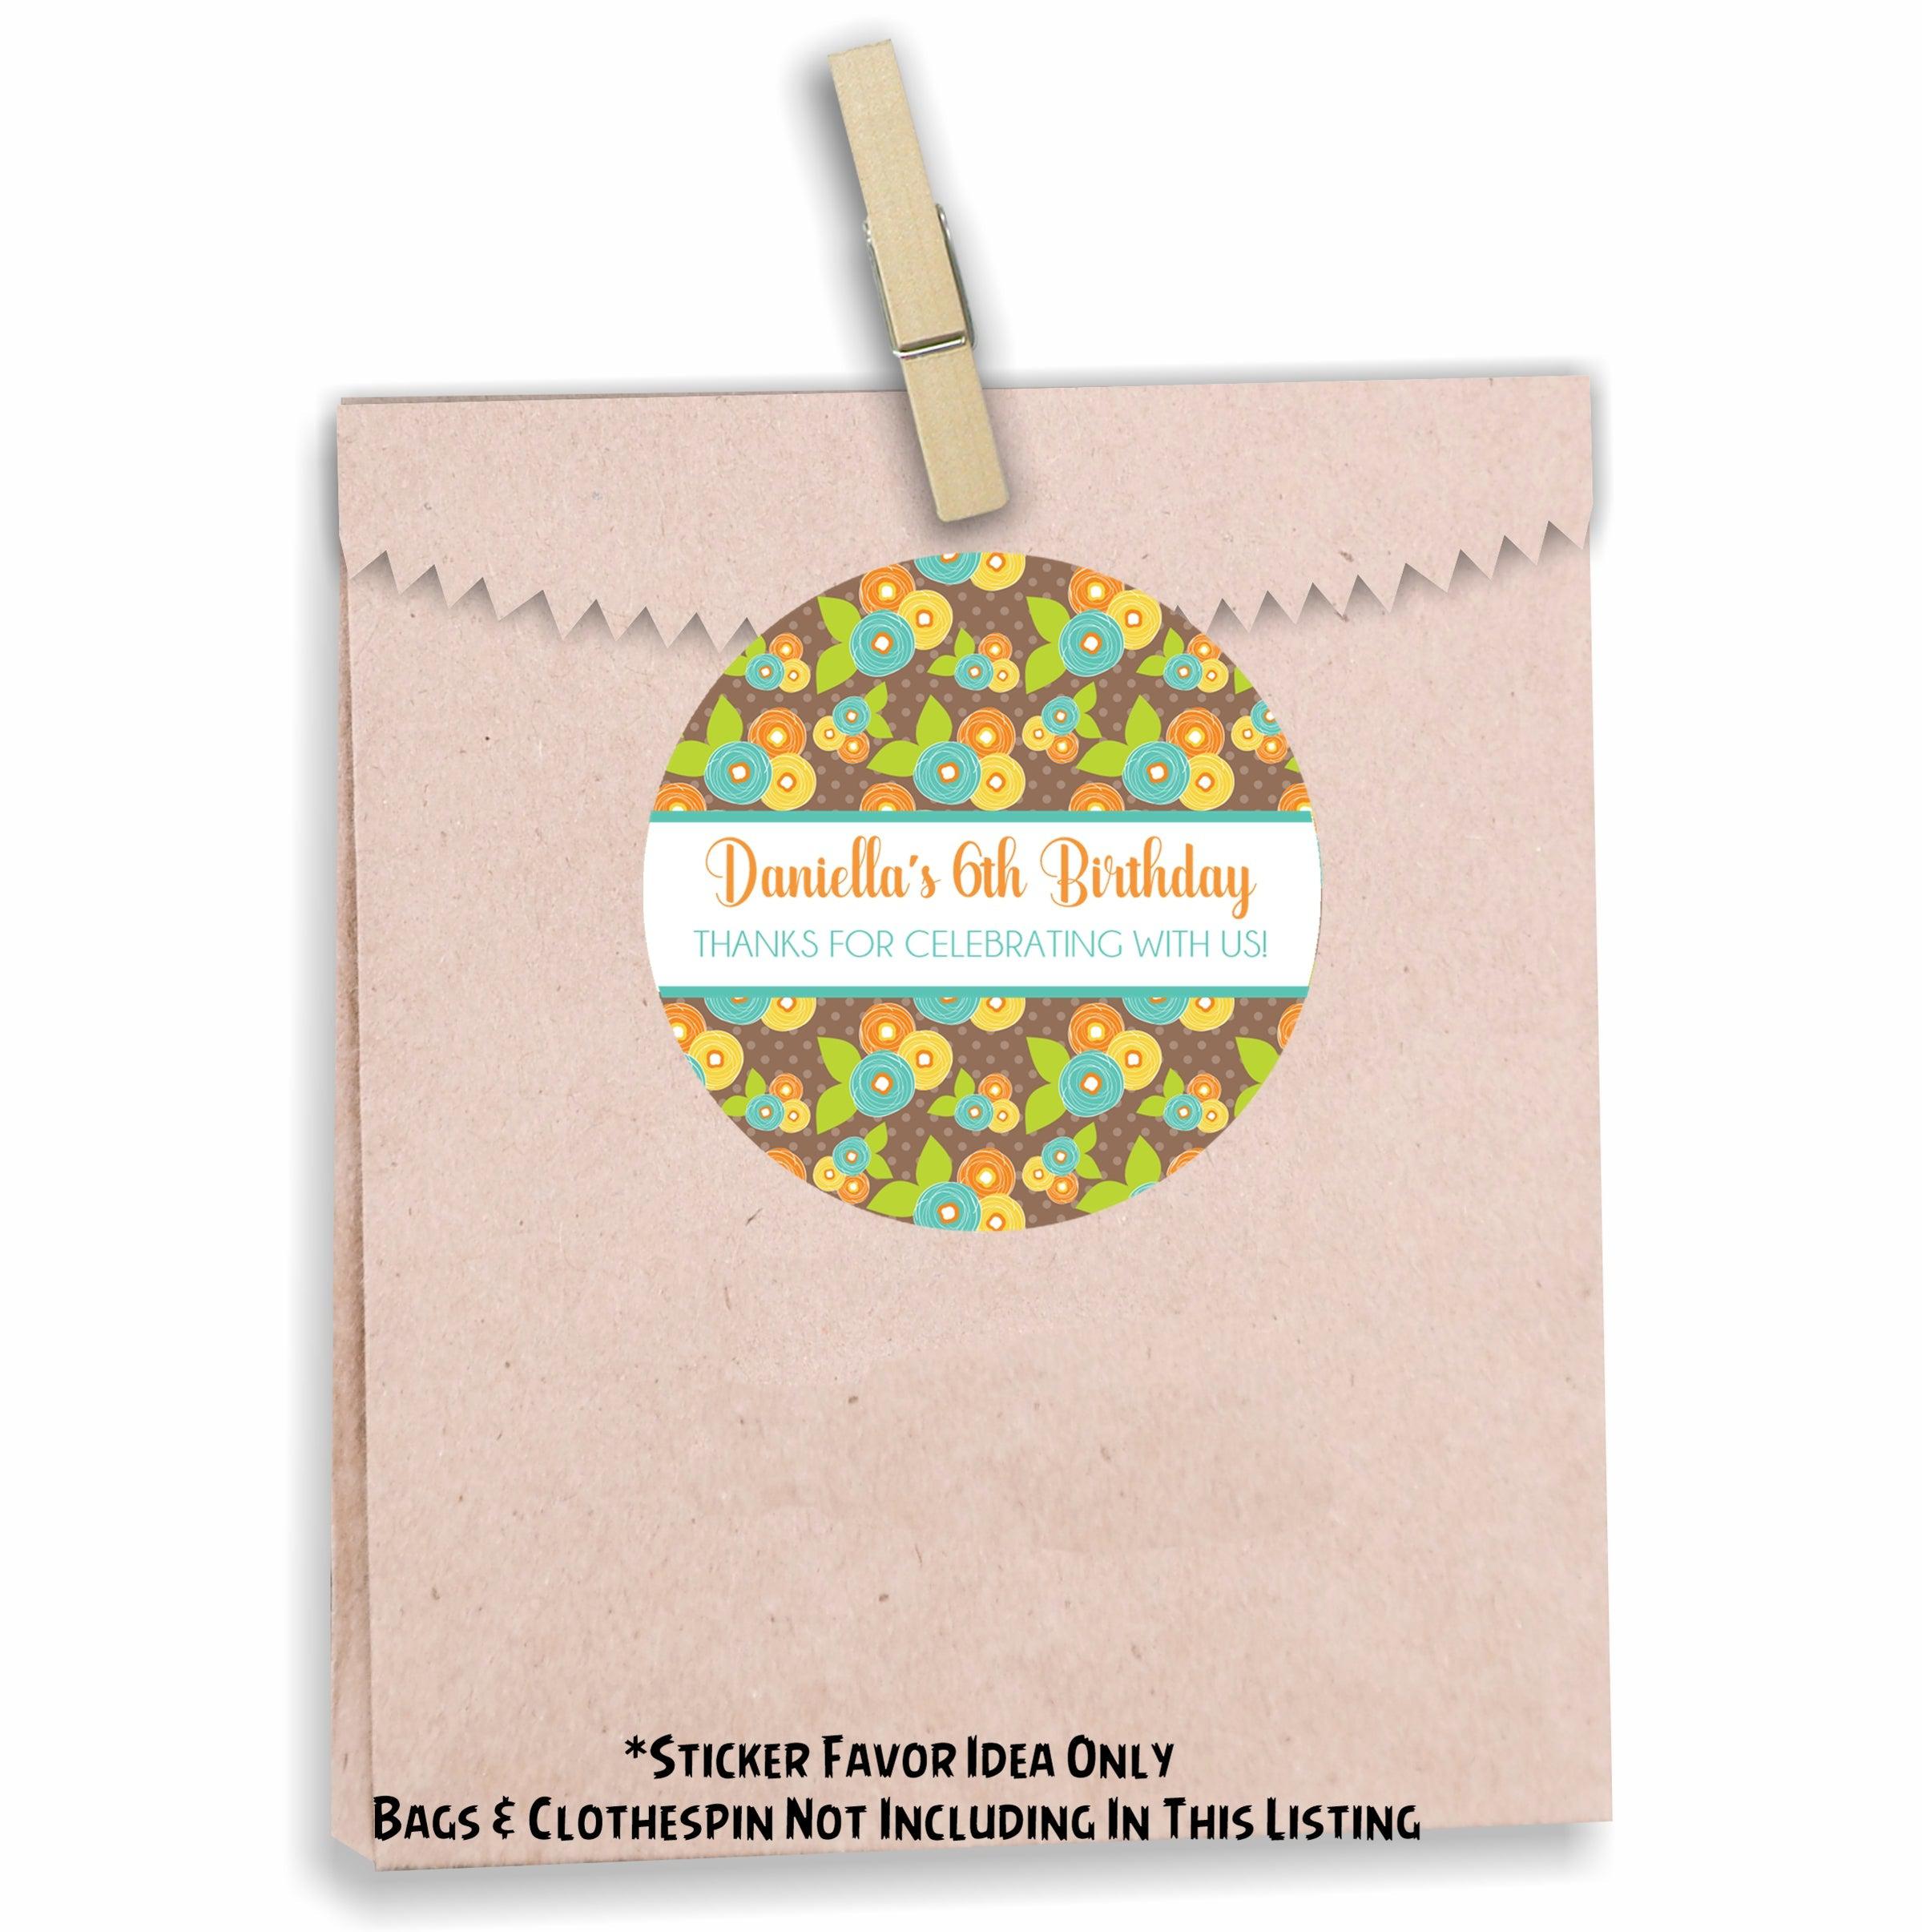 Vintage Floral Birthday Party Stickers Or Favor Tags